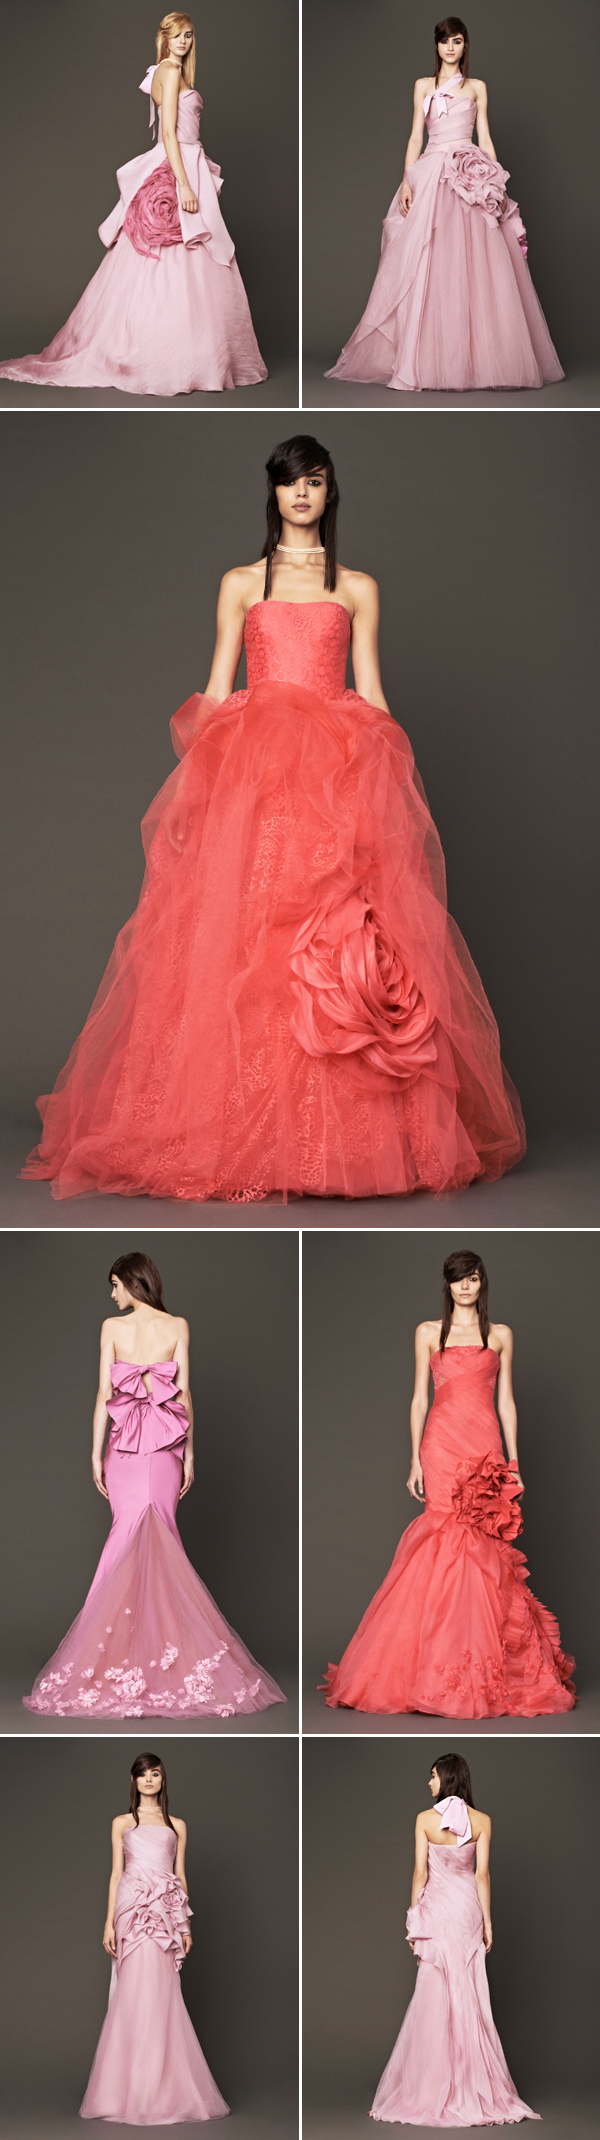 Vera Wang Pink and Red Floral Wedding Dresses